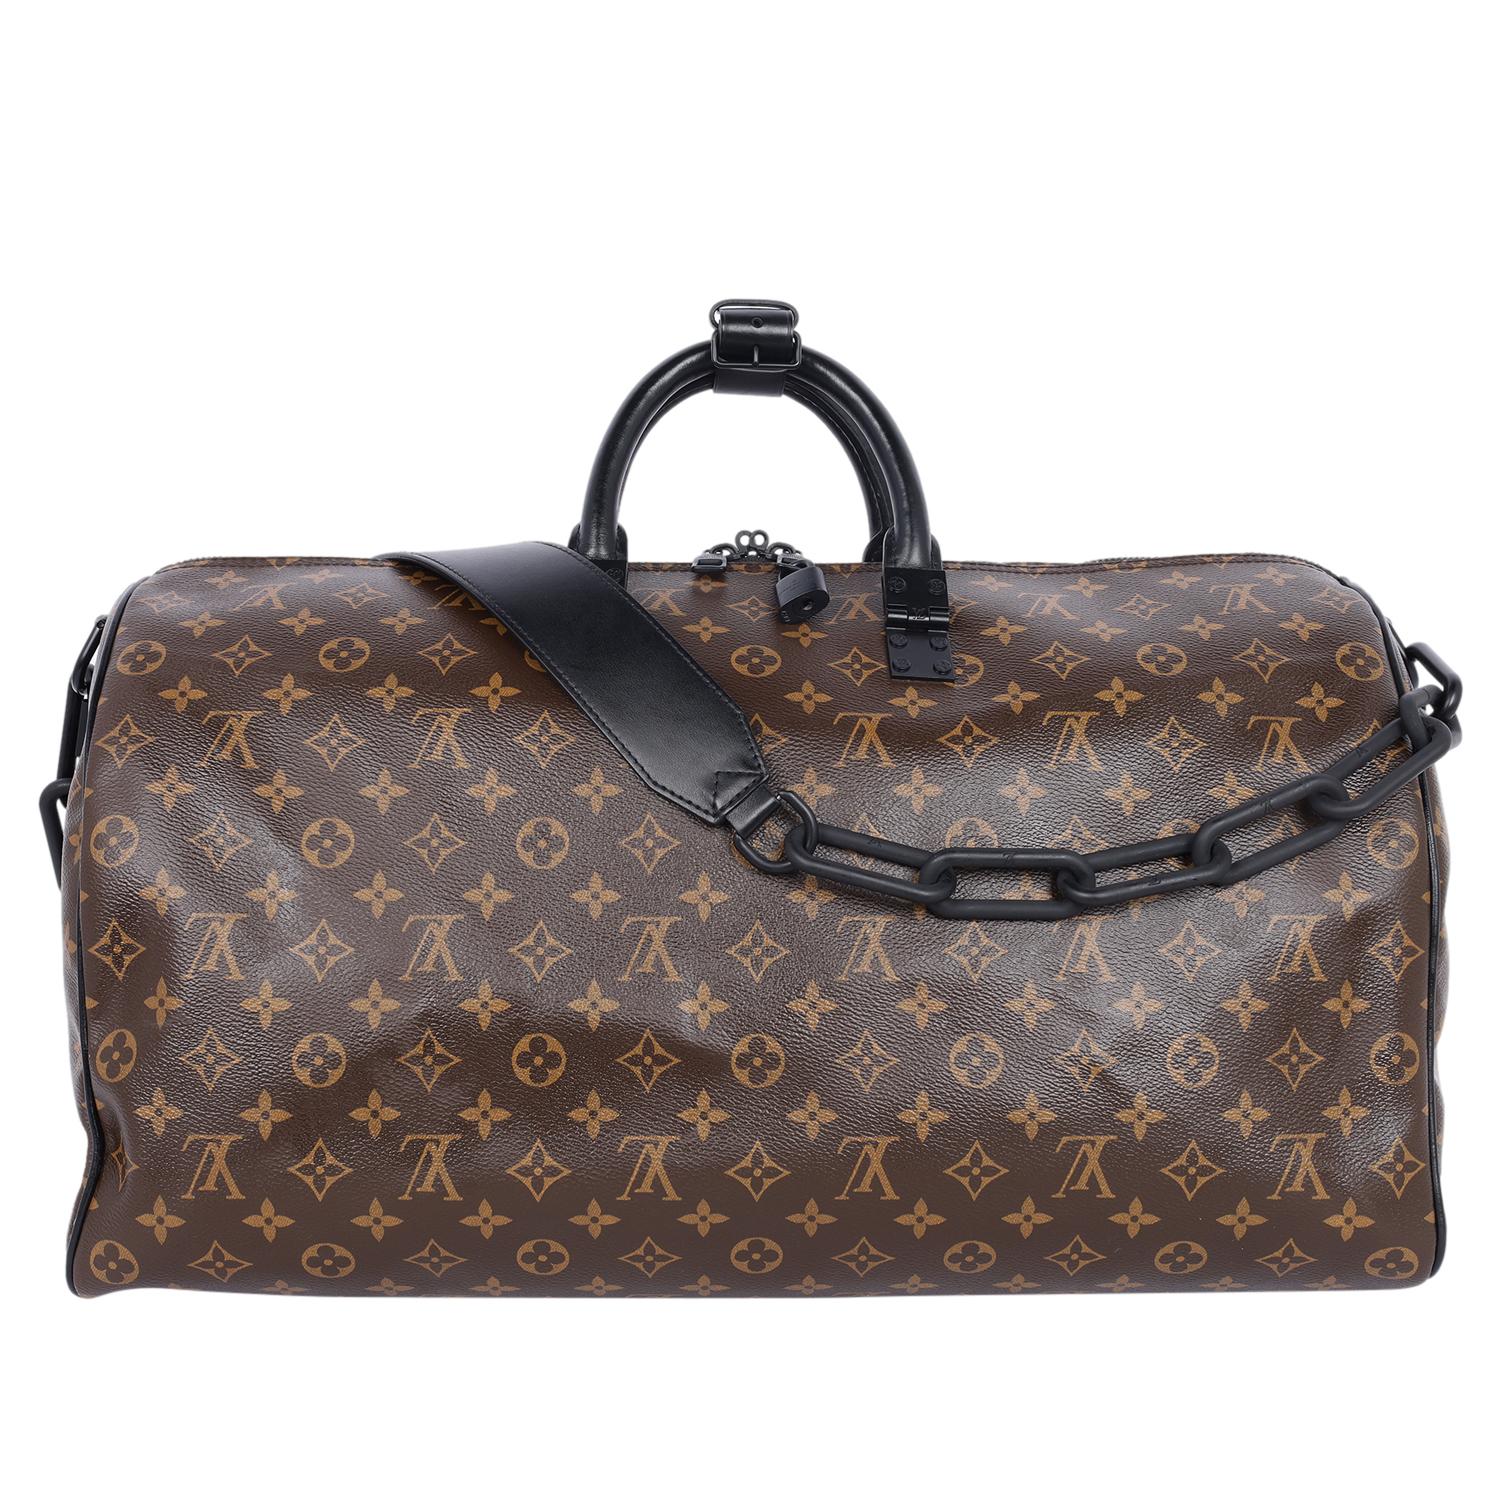 Louis Vuitton Virgil Abloh Monogram Chain Keepall Bandouliere 50 Duffle In Excellent Condition For Sale In Salt Lake Cty, UT